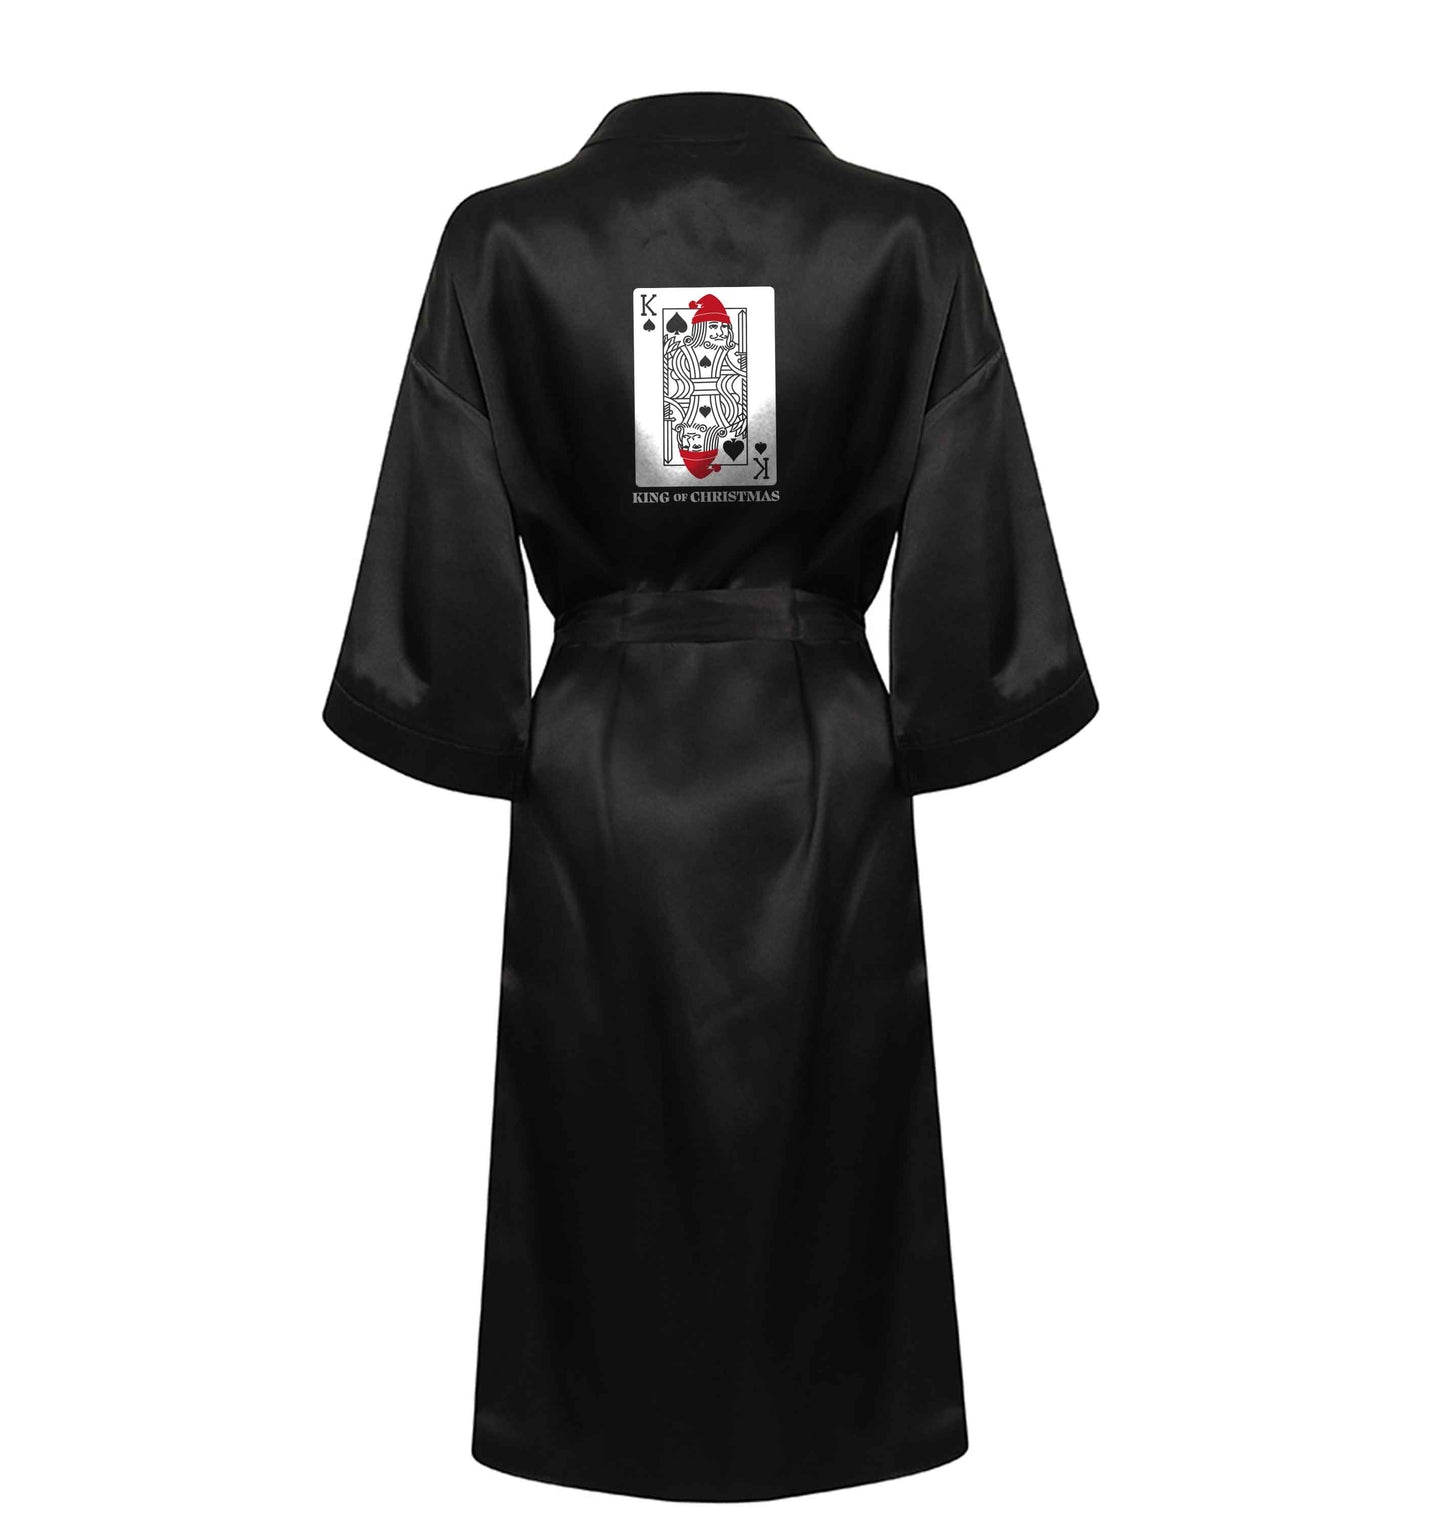 King of christmas XL/XXL black ladies dressing gown size 16/18